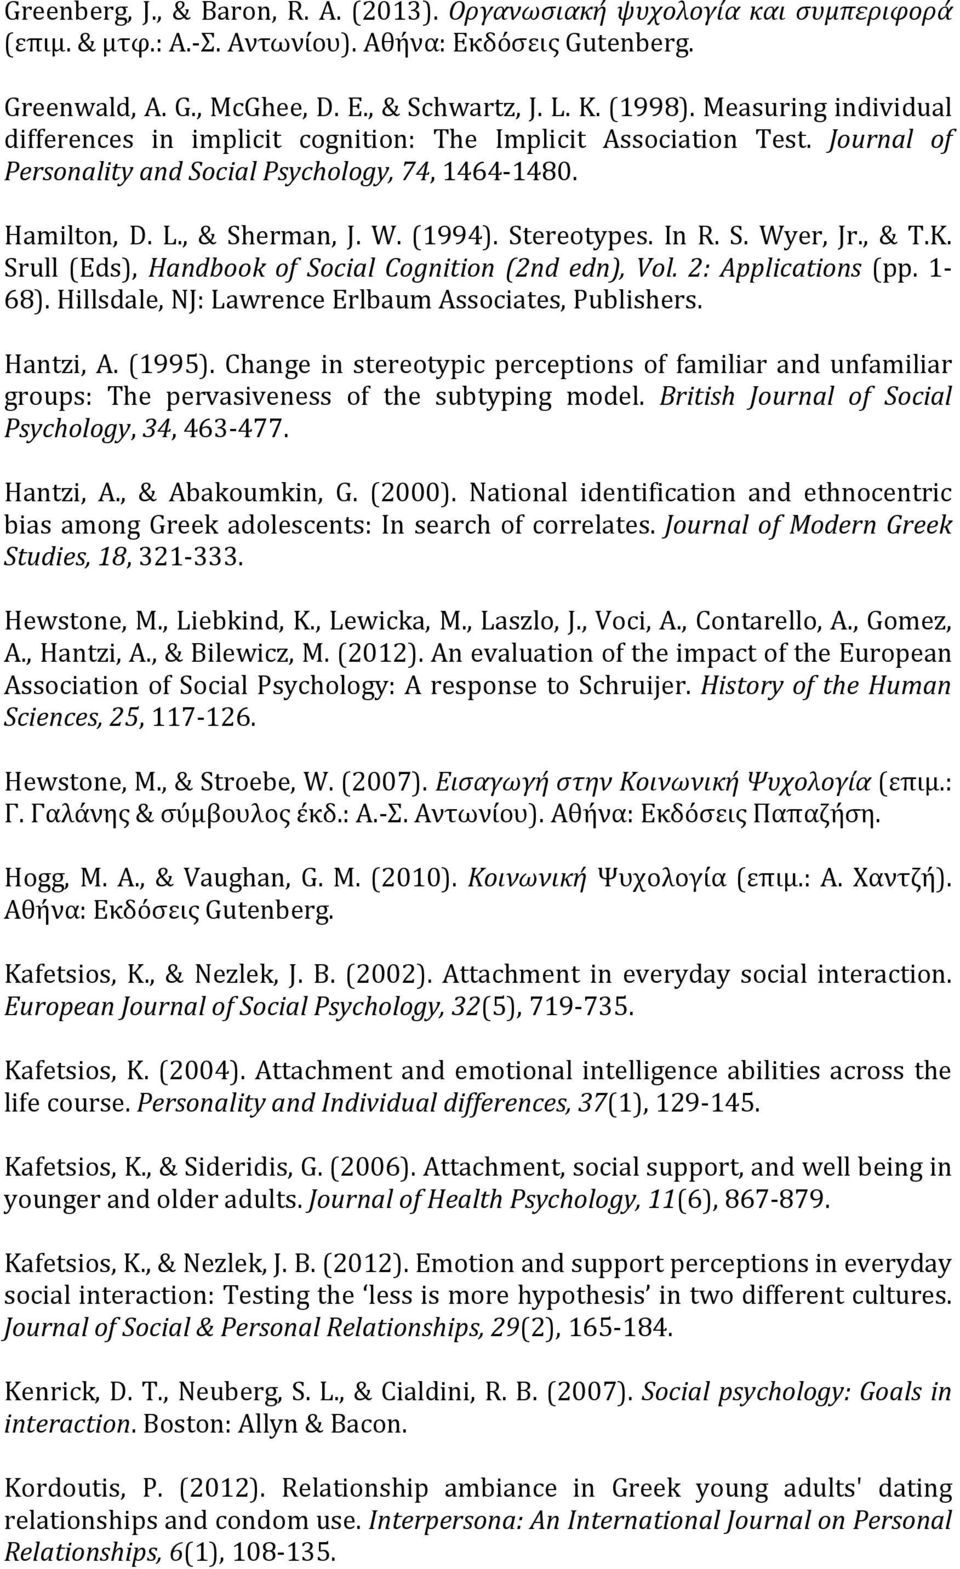 Stereotypes. In R. S. Wyer, Jr., & T.K. Srull (Eds), Handbook of Social Cognition (2nd edn), Vol. 2: Applications (pp. 1-68). Hillsdale, NJ: Lawrence Erlbaum Associates, Publishers. Hantzi, A. (1995).